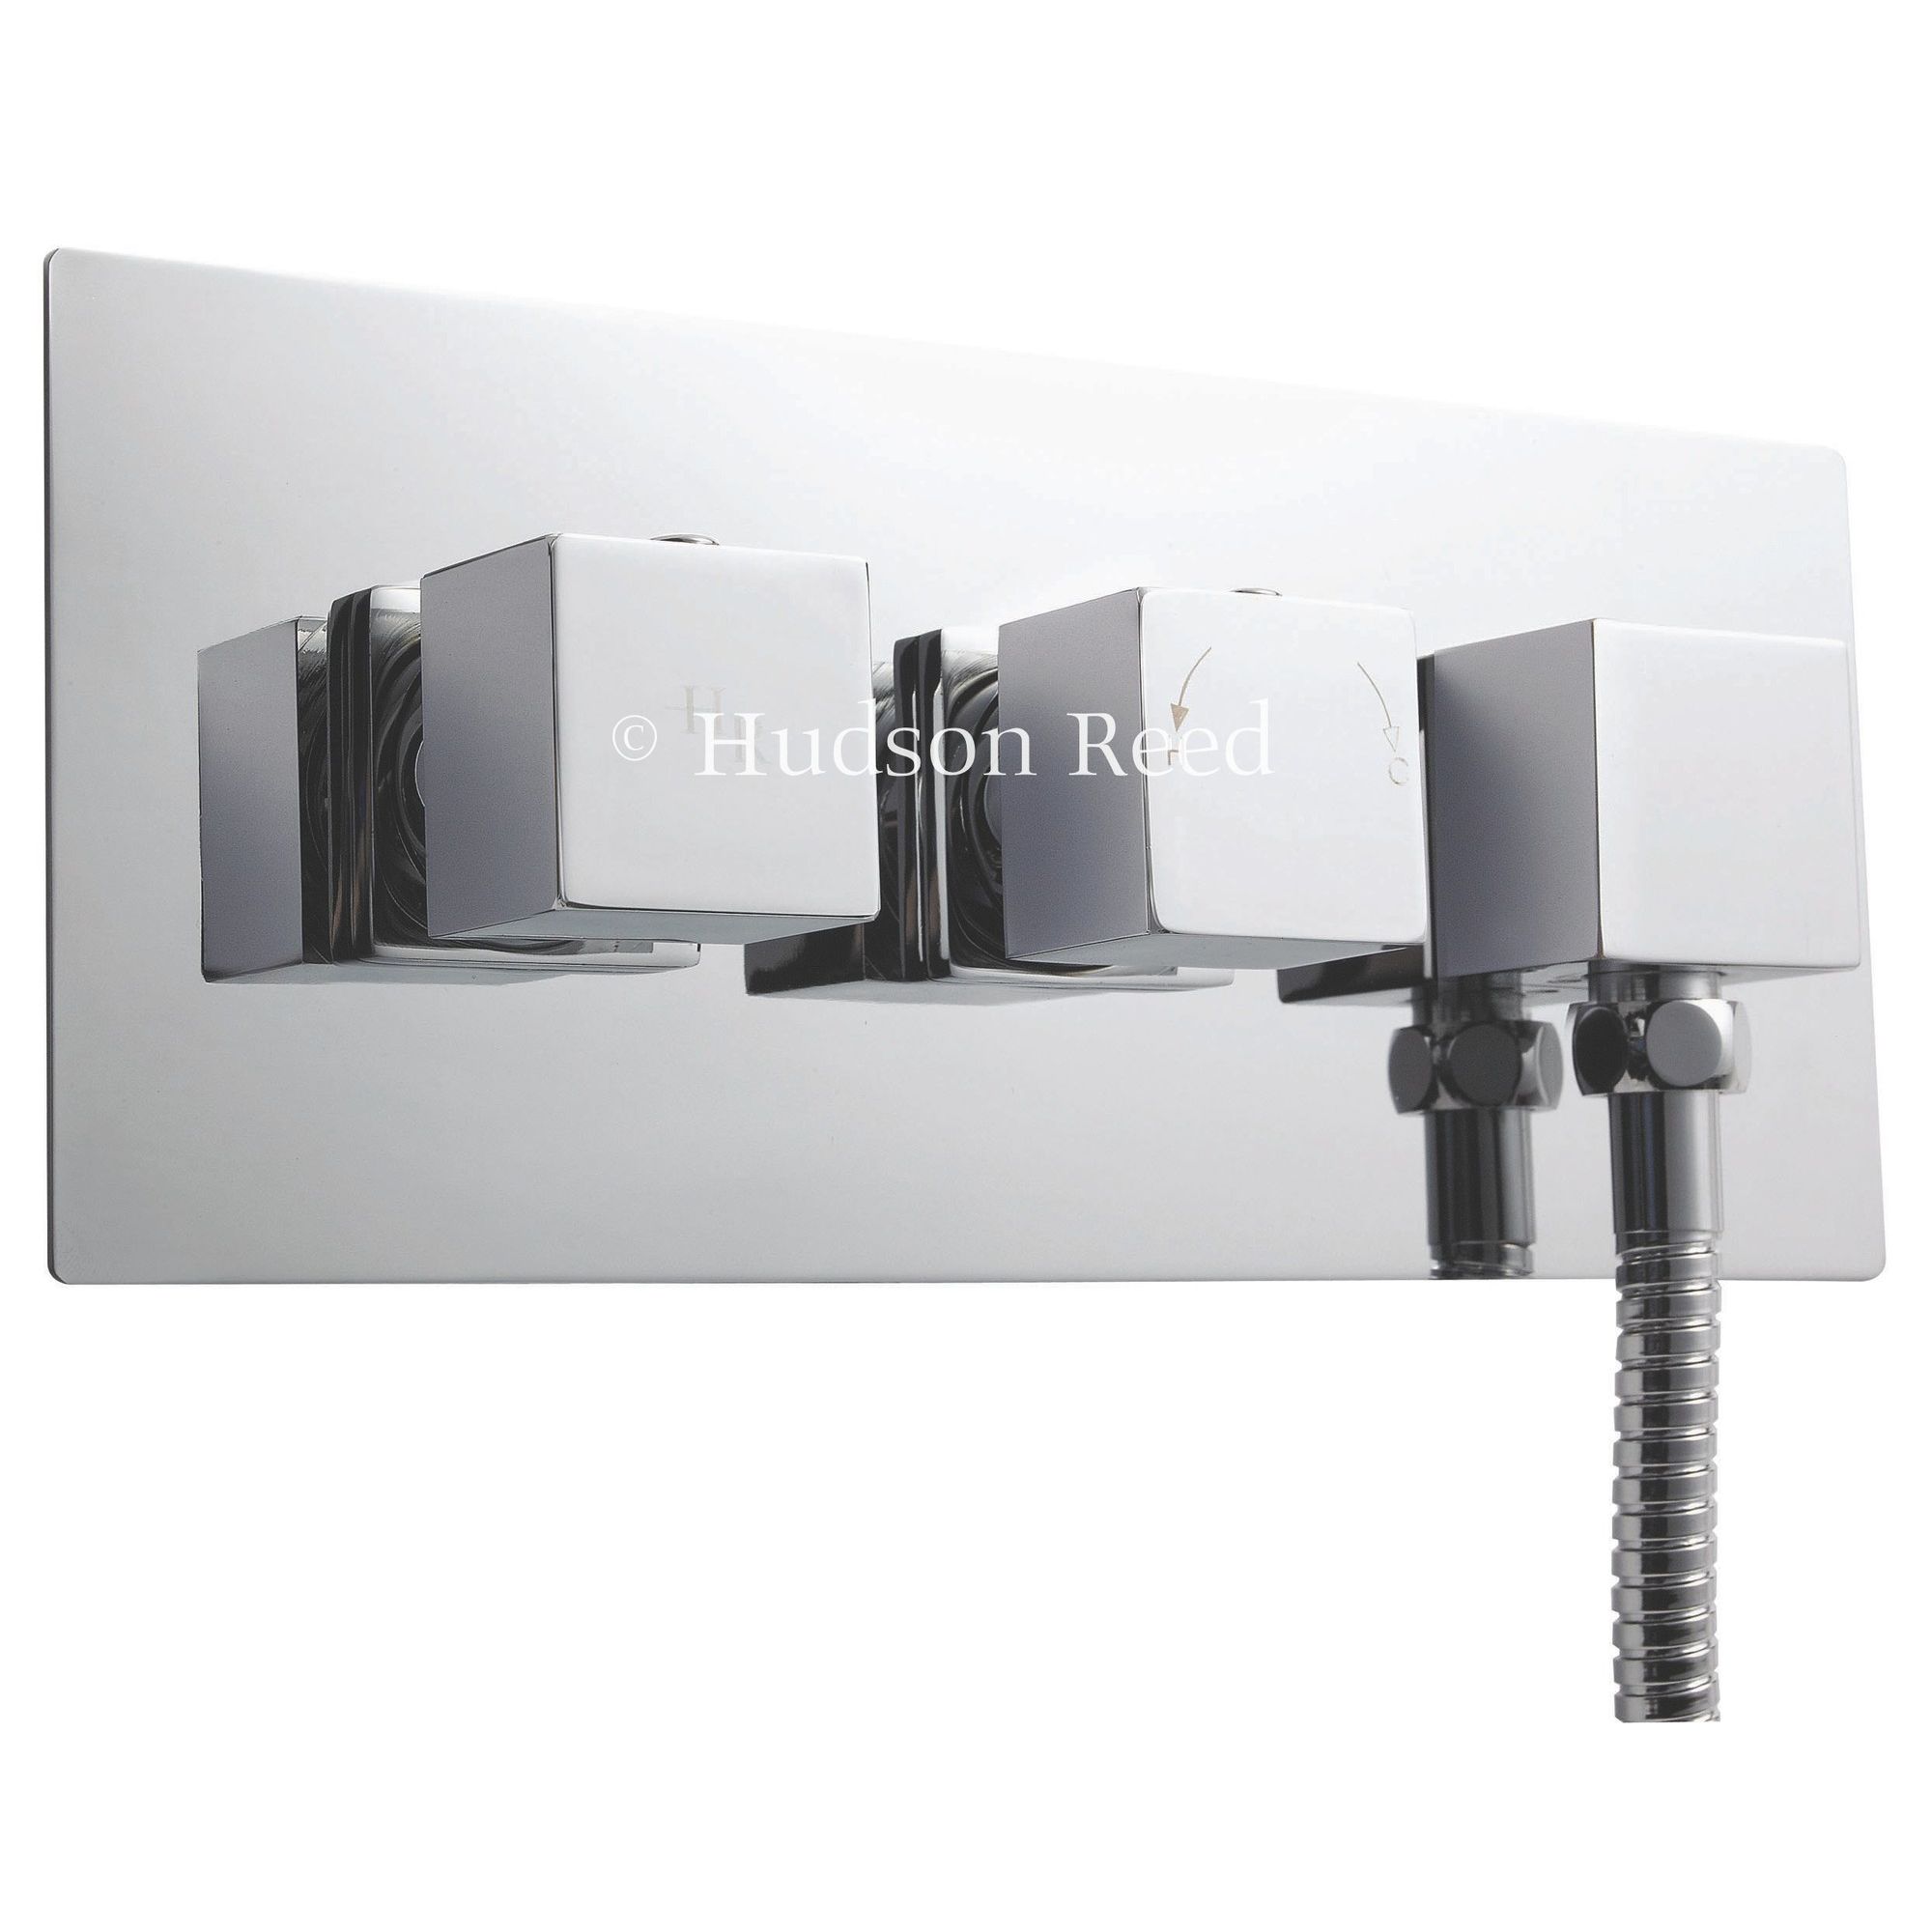 Hudson Reed Kubix Twin Thermostatic Valve with Built In Diverter and Outlet at Tesco Direct